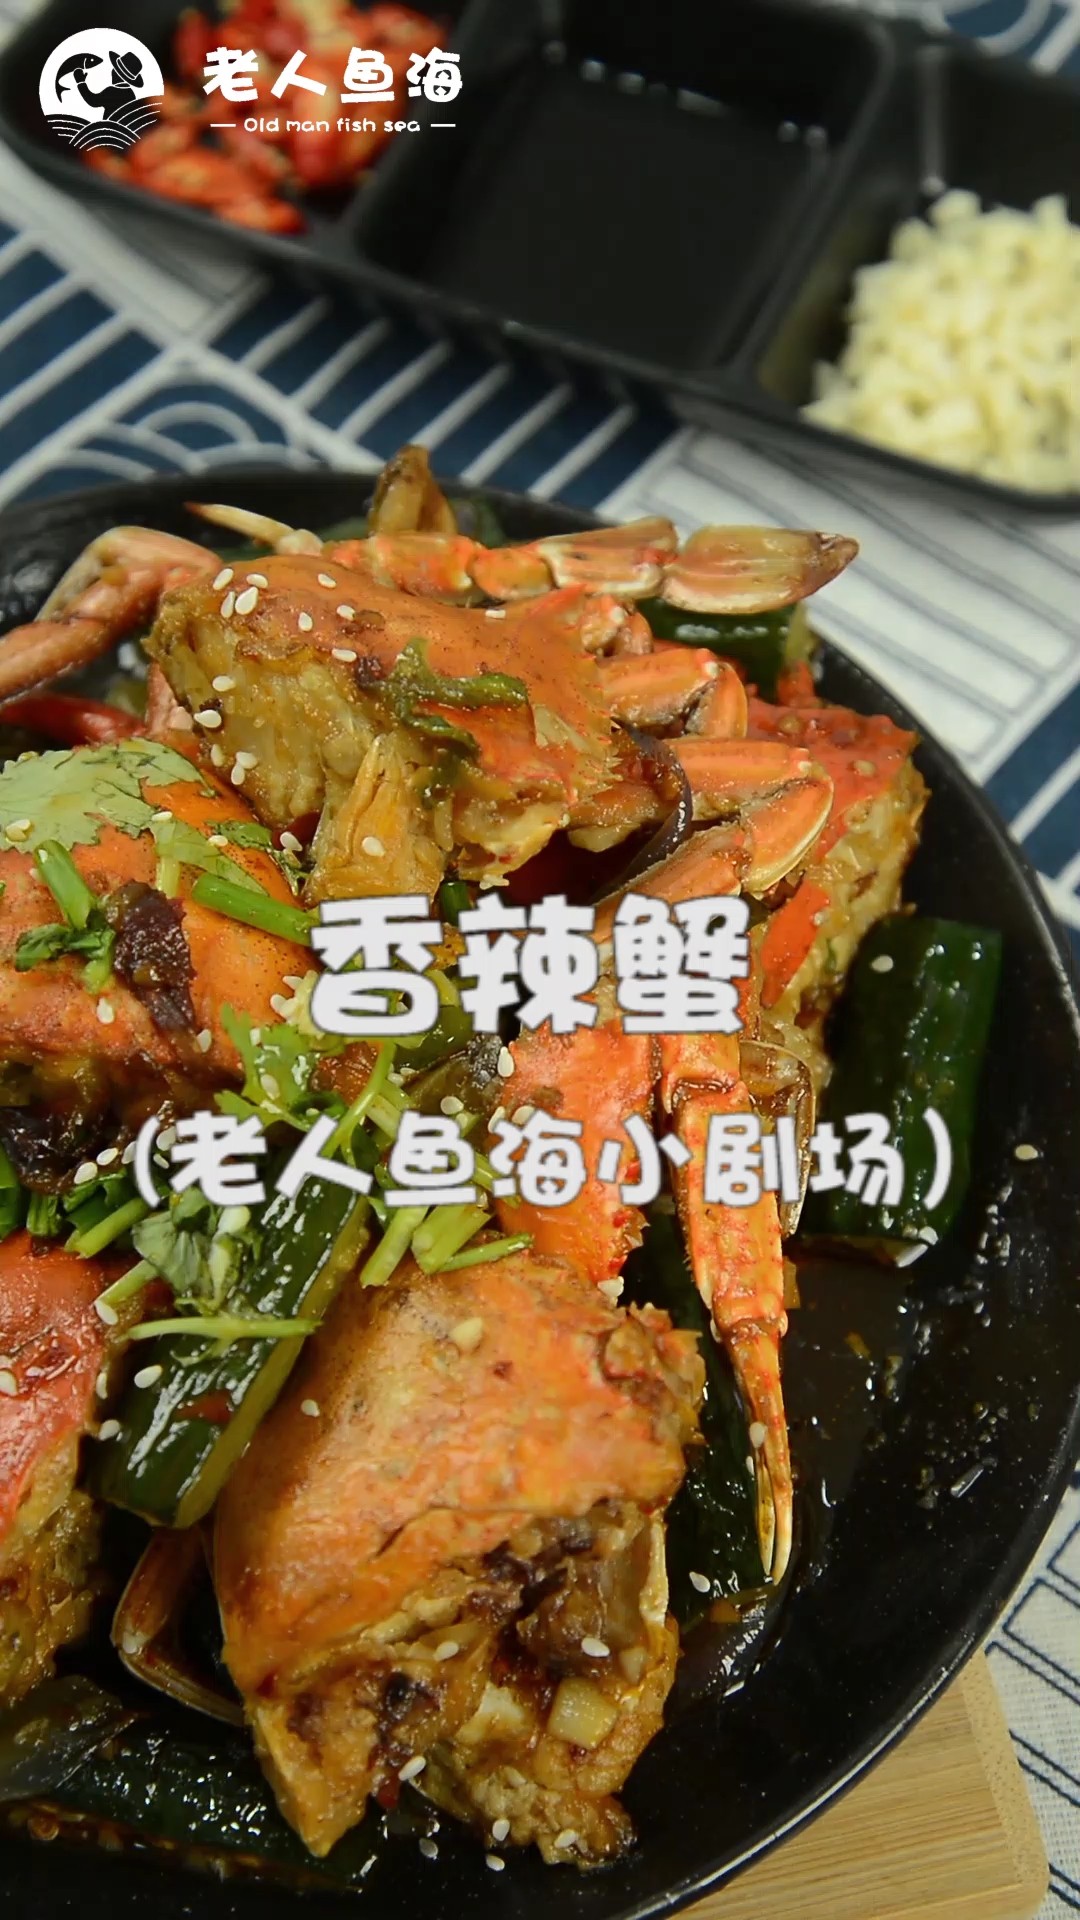 Homemade Spicy Crab at Home, Life is Full of Joy and Taste recipe